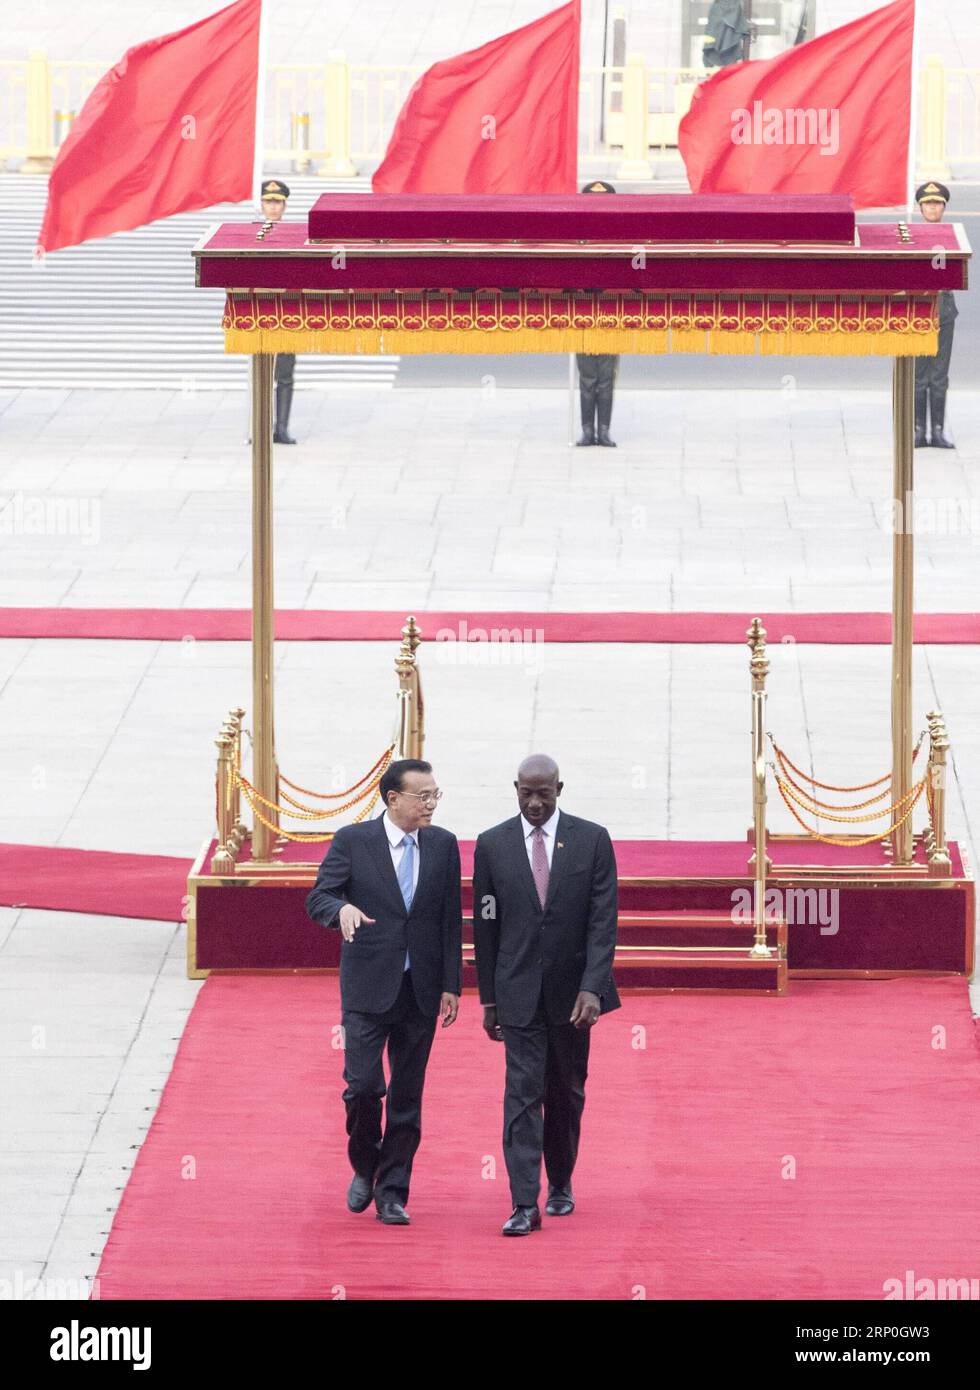 (180514) -- BEIJING, May 14, 2018 -- Chinese Premier Li Keqiang (L) holds a welcome ceremony for Prime Minister Keith Rowley of Trinidad and Tobago before their talks in Beijing, capital of China, May 14, 2018. )(mcg) CHINA-BEIJING-LI KEQIANG-TRINIDAD AND TOBAGO-TALKS (CN) WangxYe PUBLICATIONxNOTxINxCHN Stock Photo